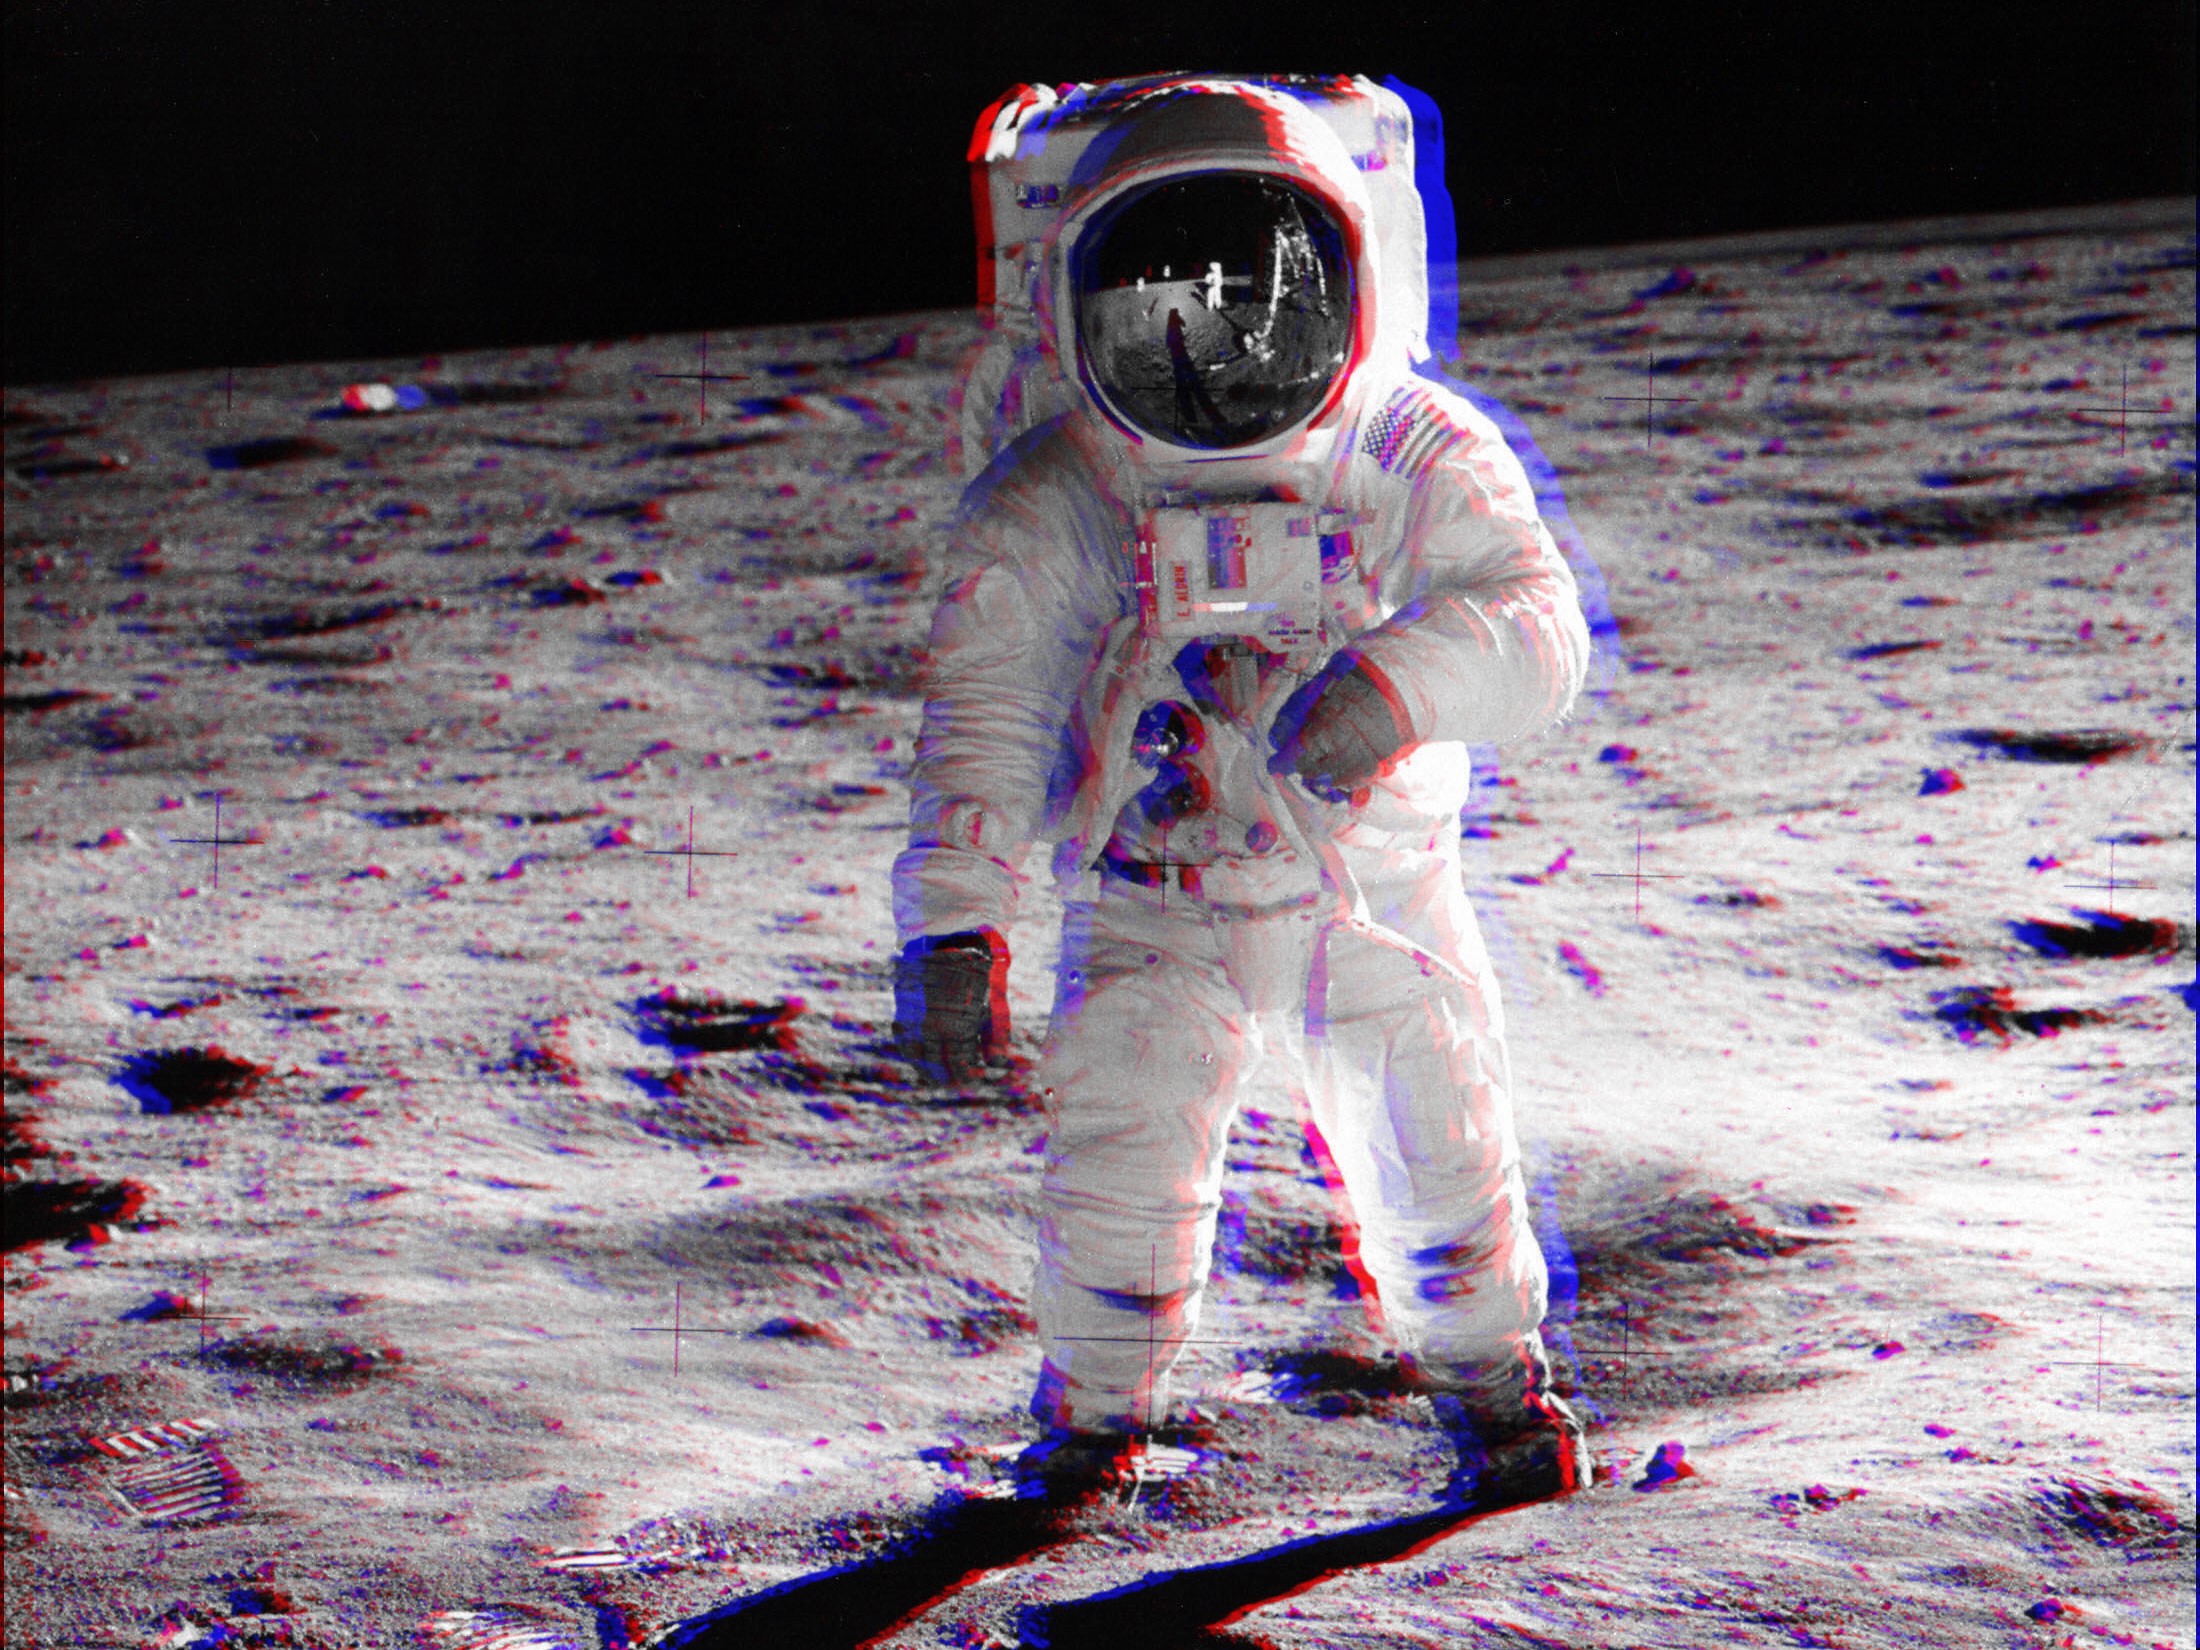 General 2200x1650 CGI anaglyph 3D astronaut Moon space